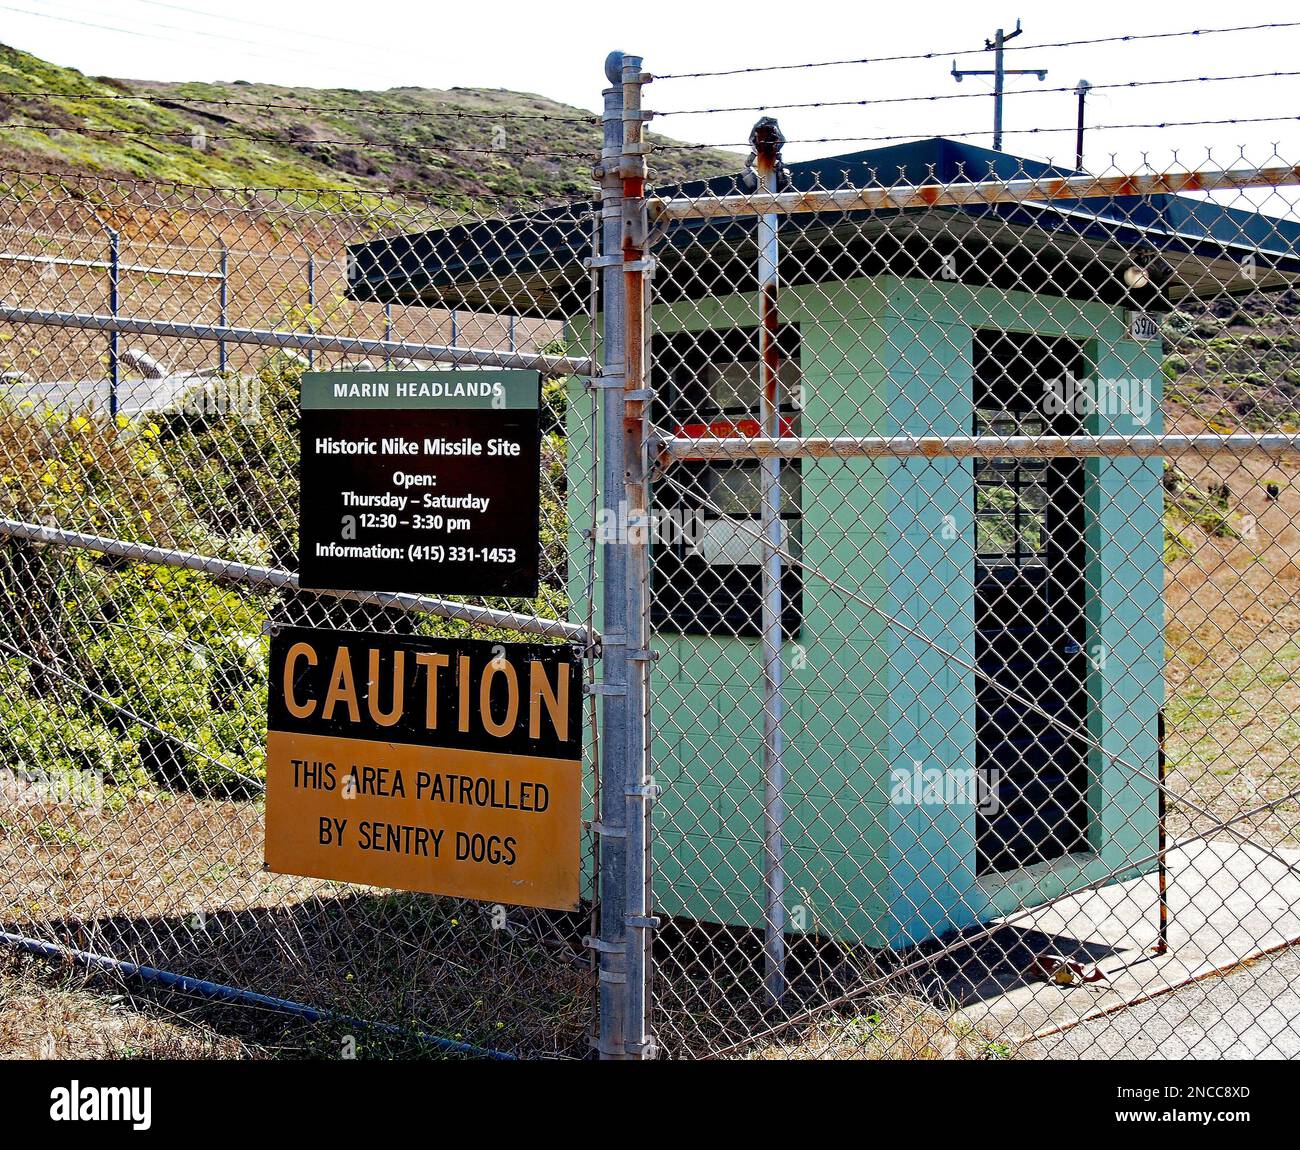 Marin Headlands Historic Nike Missile Site entrance signs, California Stock Photo